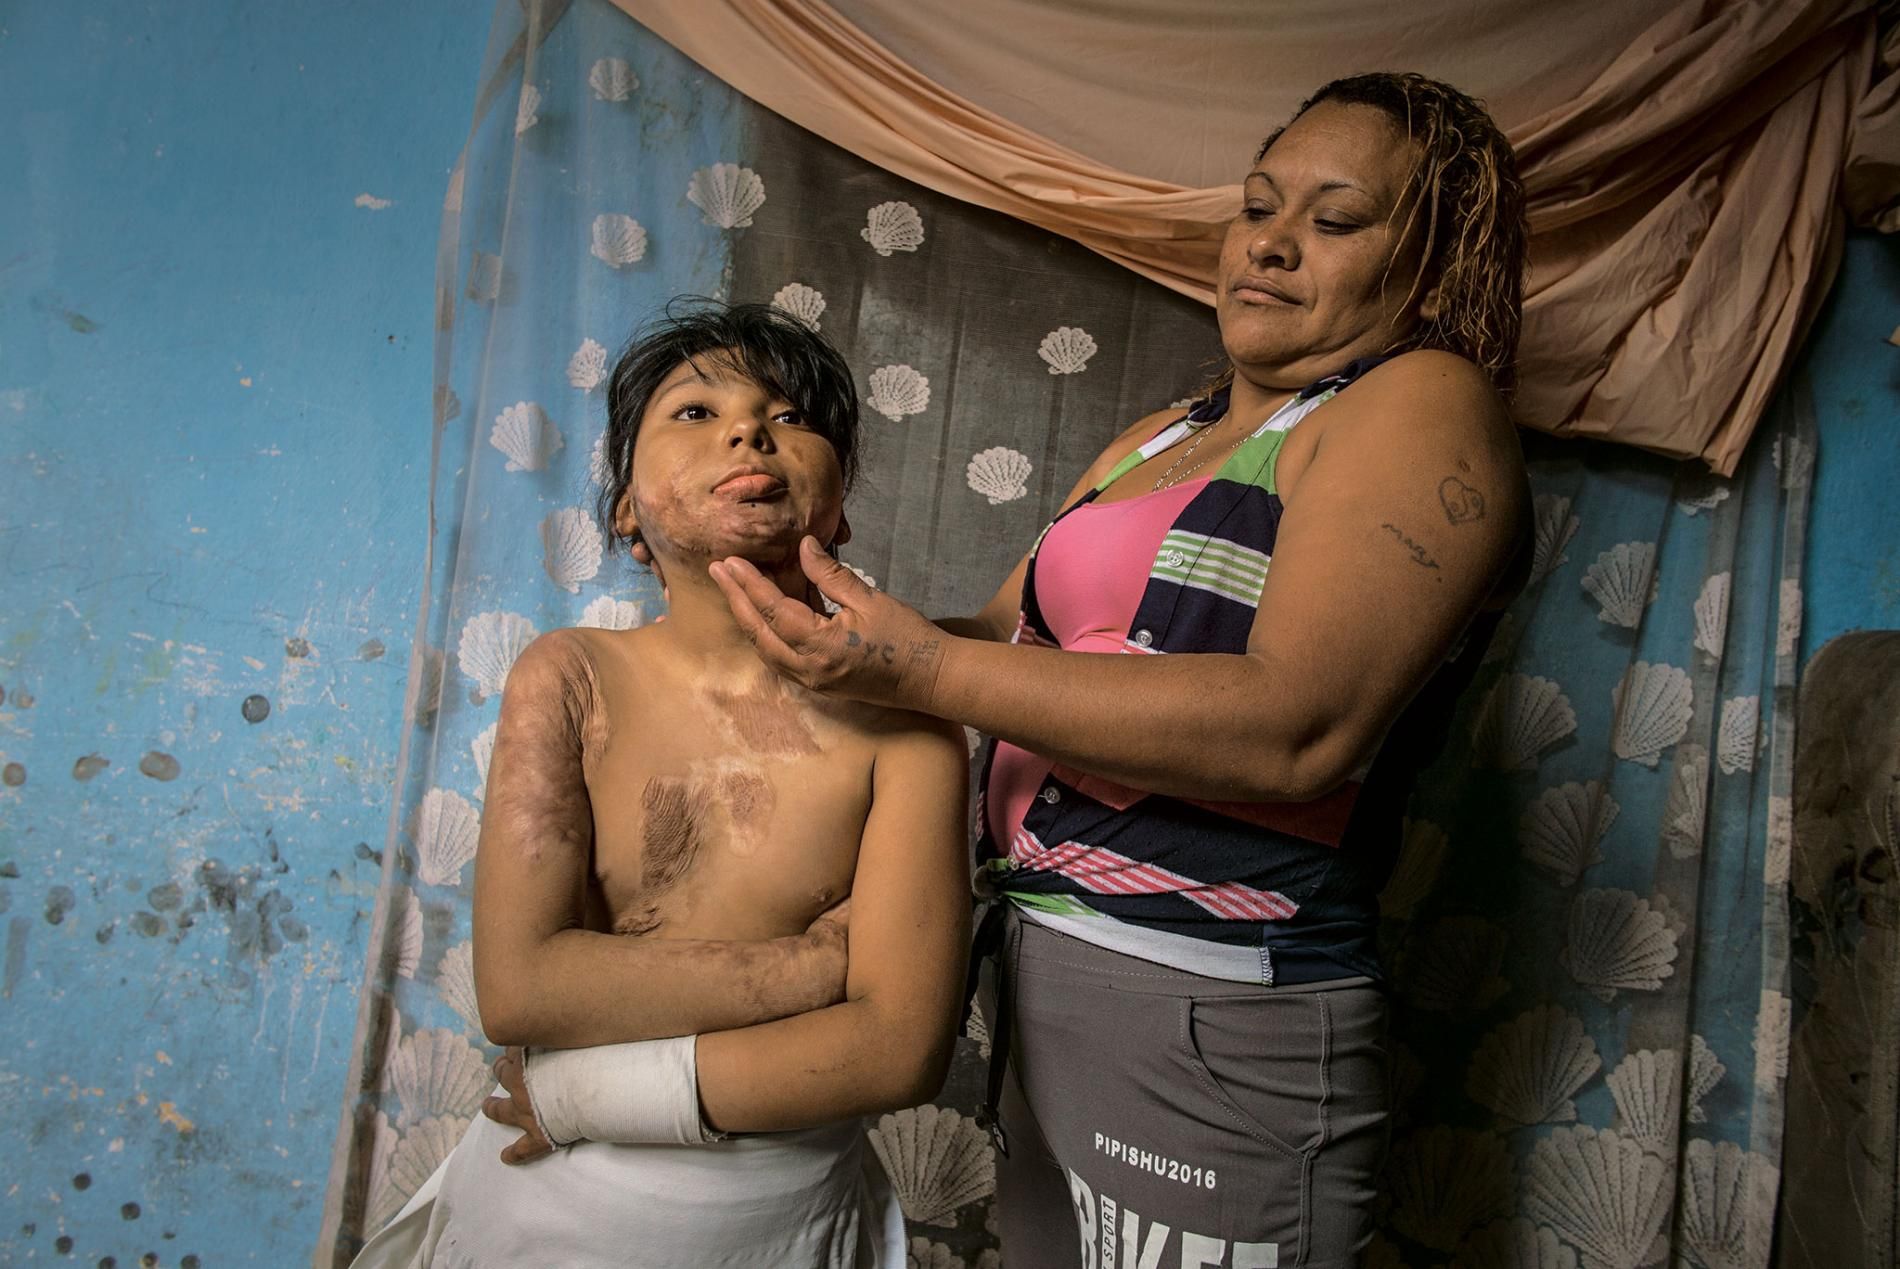 Two years ago Kimberly Galindo was severely burned by her family's open cooking fire. Now 10, she is still undergoing cosmetic surgery for the scars, as well as physical therapy. Image by Lynn Johnson. Guatemala, 2017.